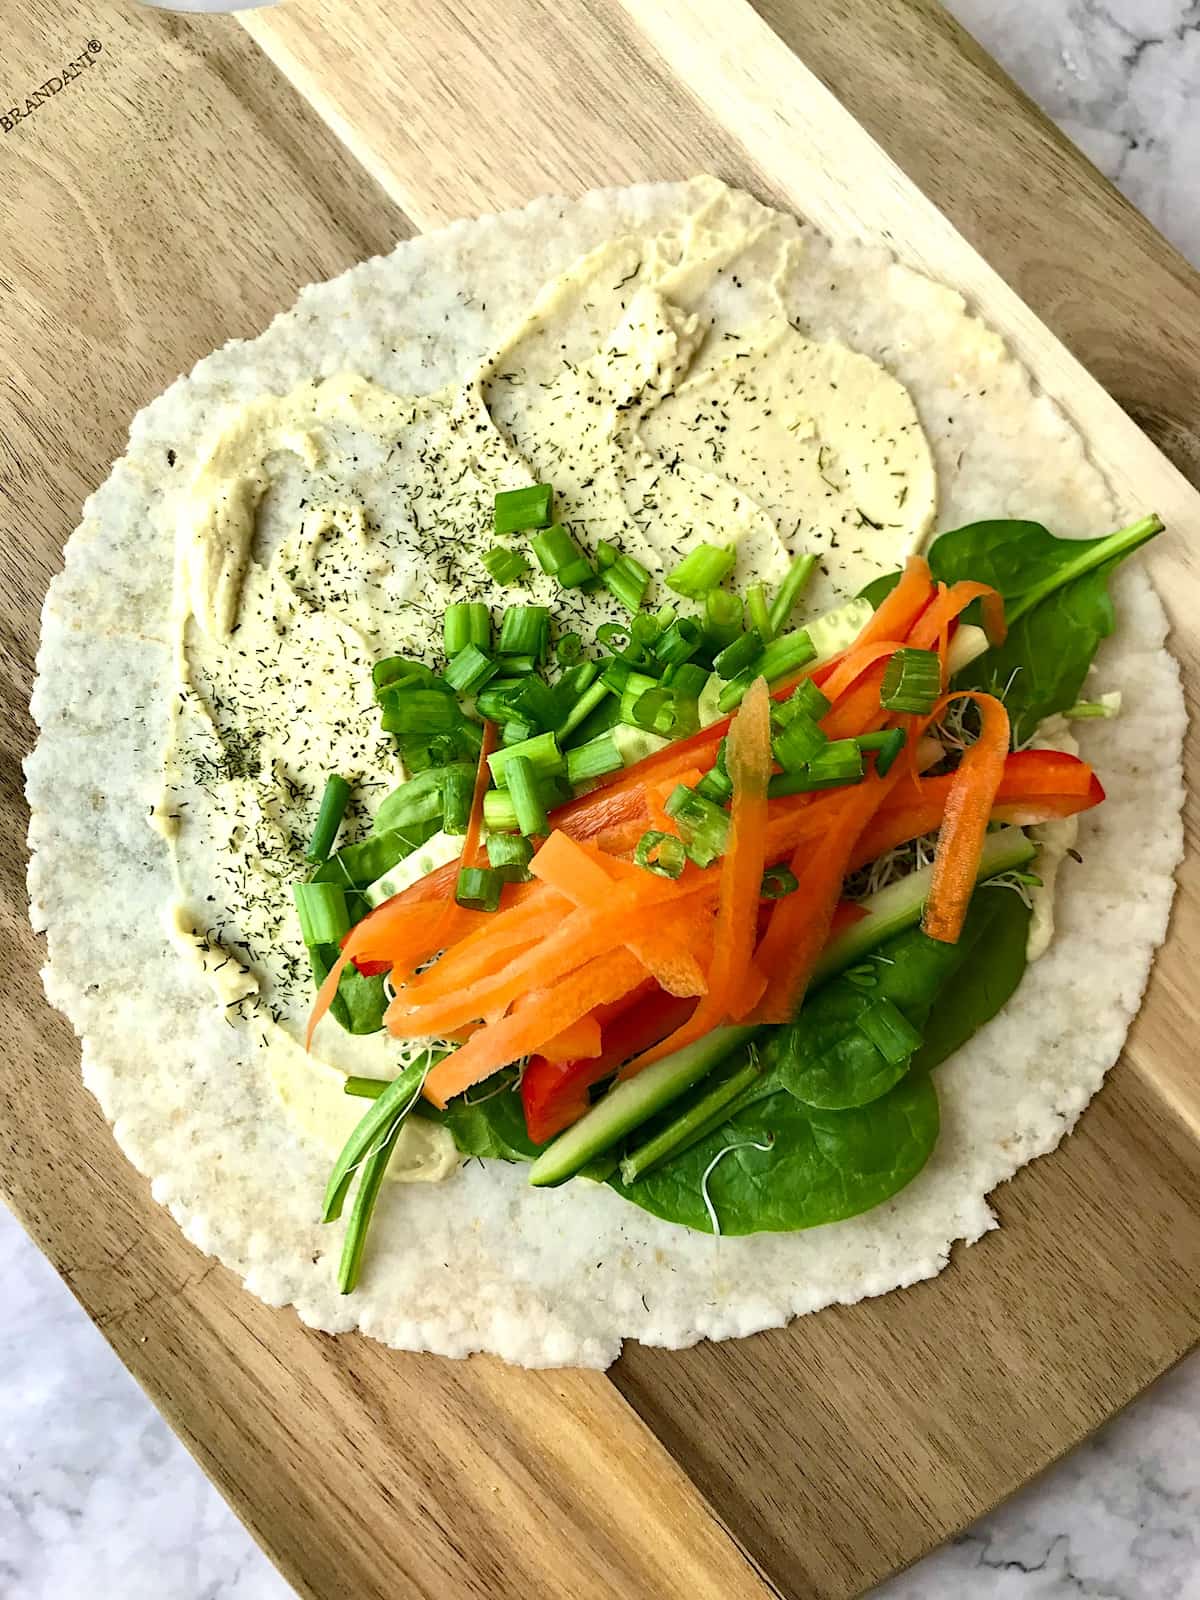 A tortilla topped with hummus and a variety of veggies.